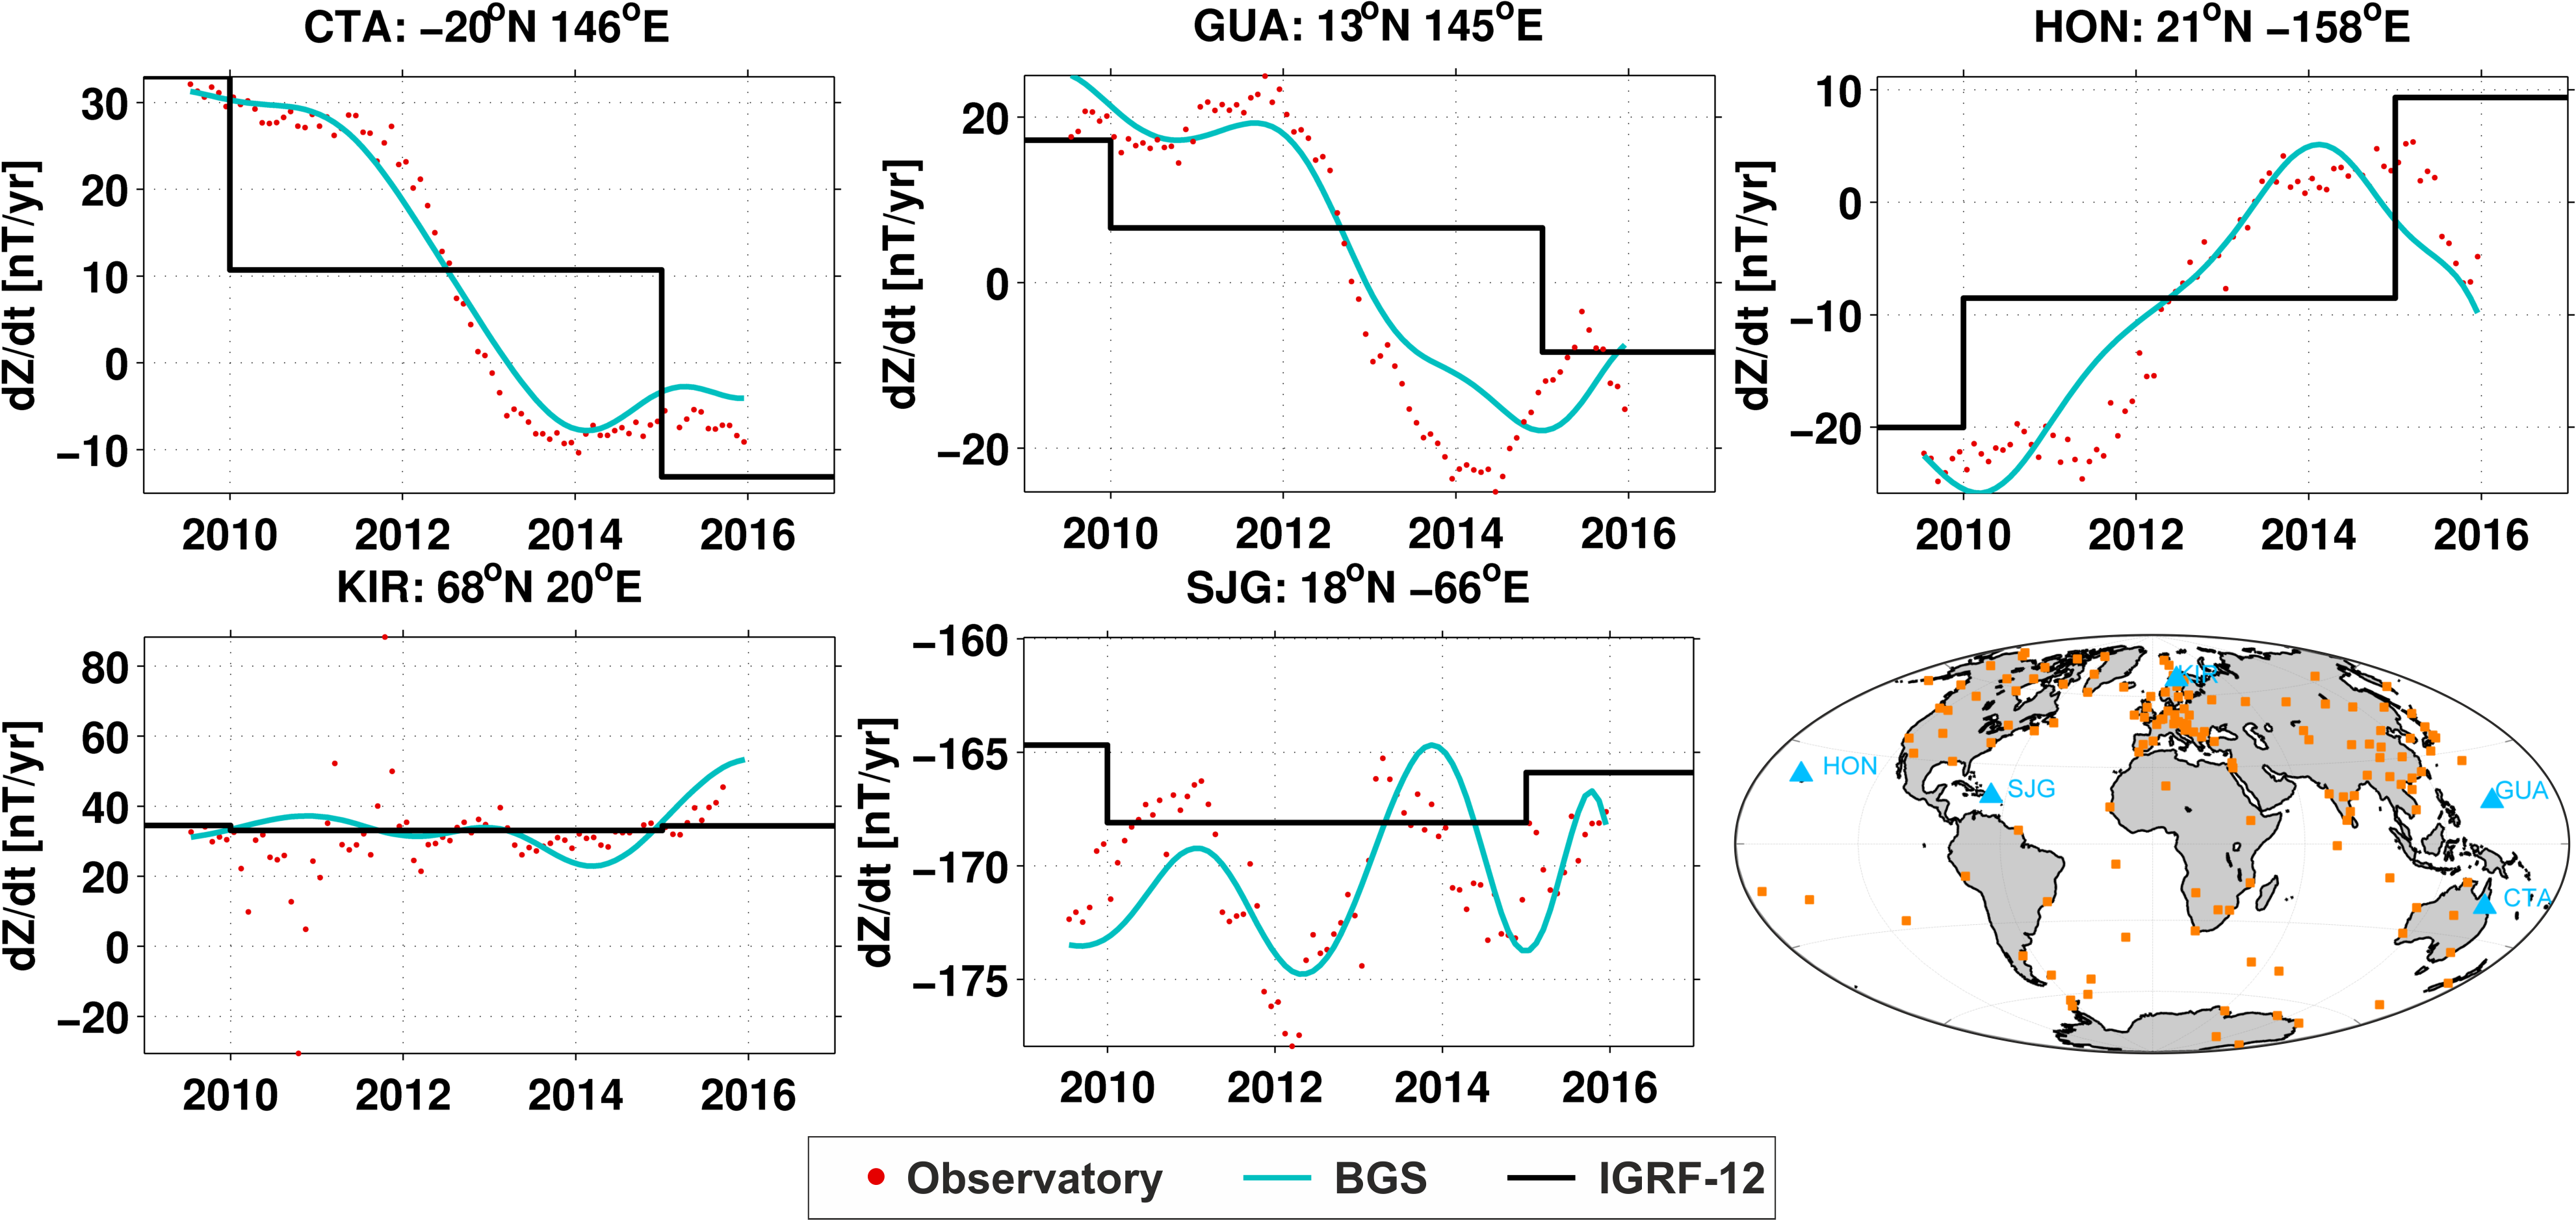 Figure 2: Vertical (Z) component of SV at Charter's Towers (CTA), Guam (GUA), Honolulu (HON), Kiruna (KIR) and San Juan (SJG) geomagnetic observatories. BGS MEME core field model (blue line) and predictions of IGRF-12 (black line) are shown with monthly mean data (red points). The map shows observatory locations worldwide, highlighting those used here.